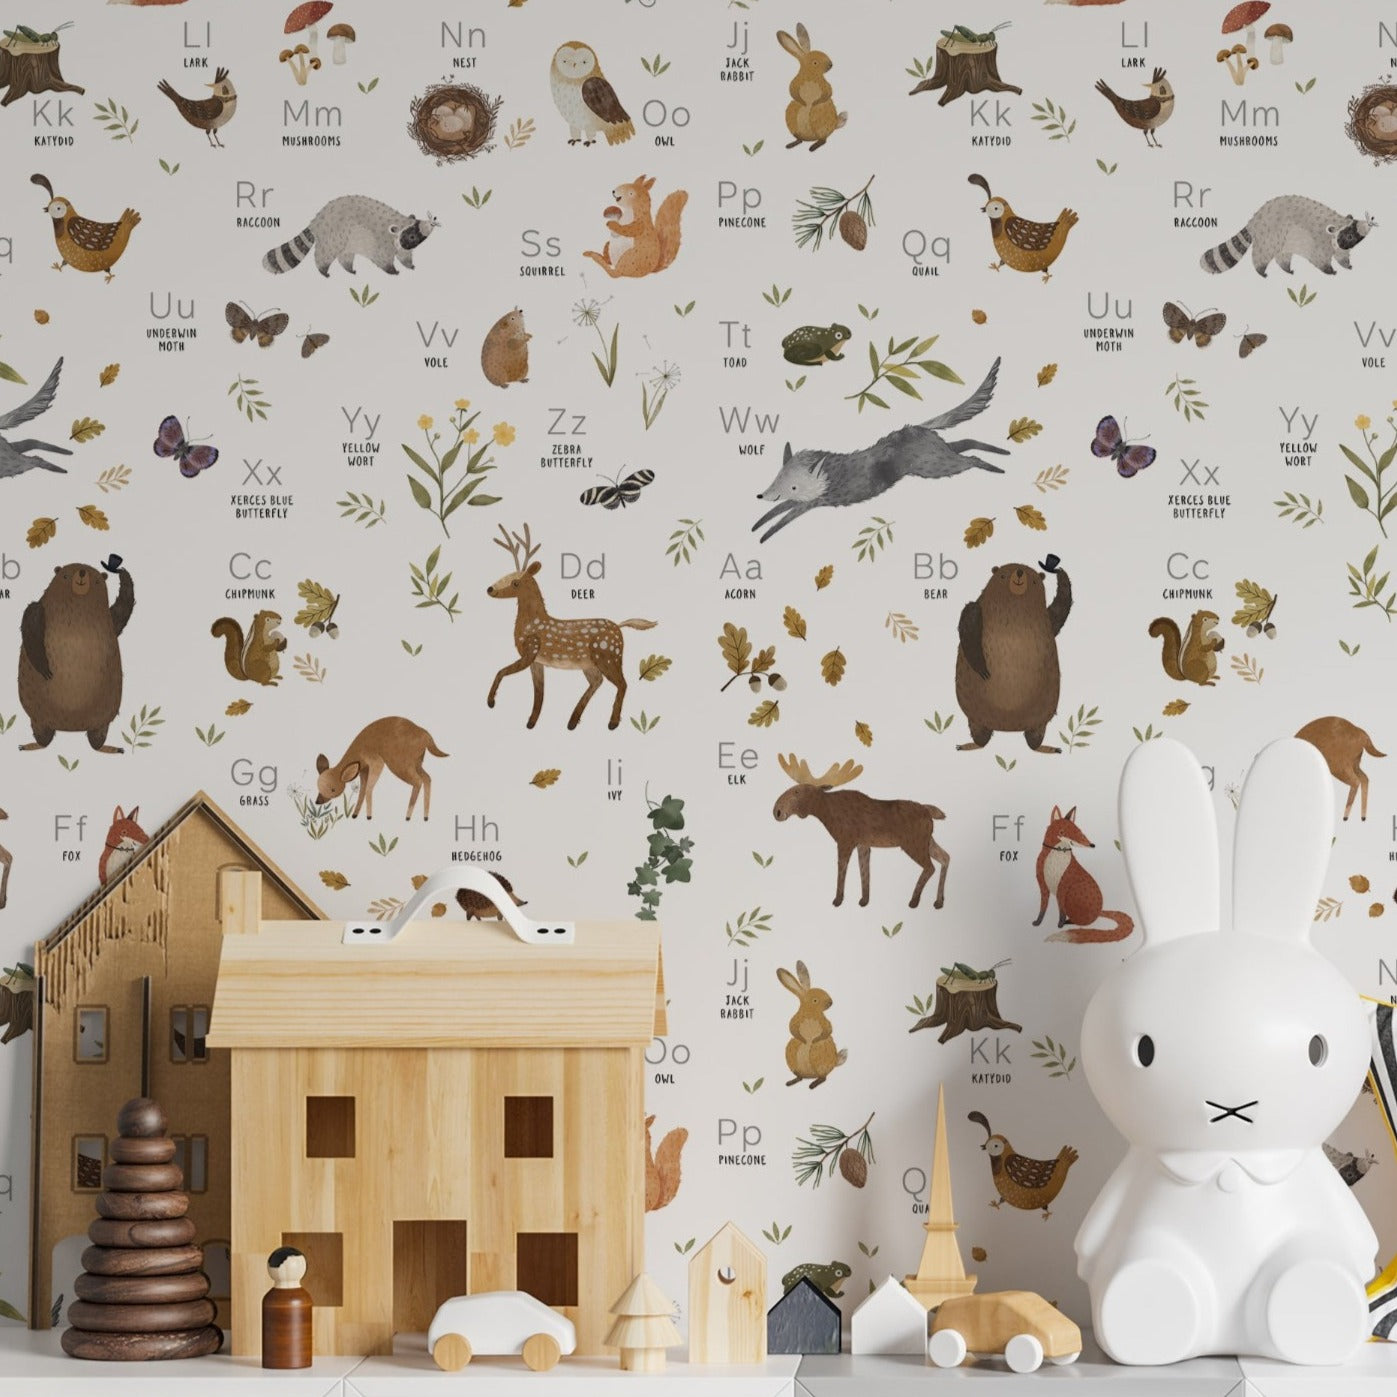 Fun and Educational: Kids Wallpaper Ideas for a Playful Learning Environment